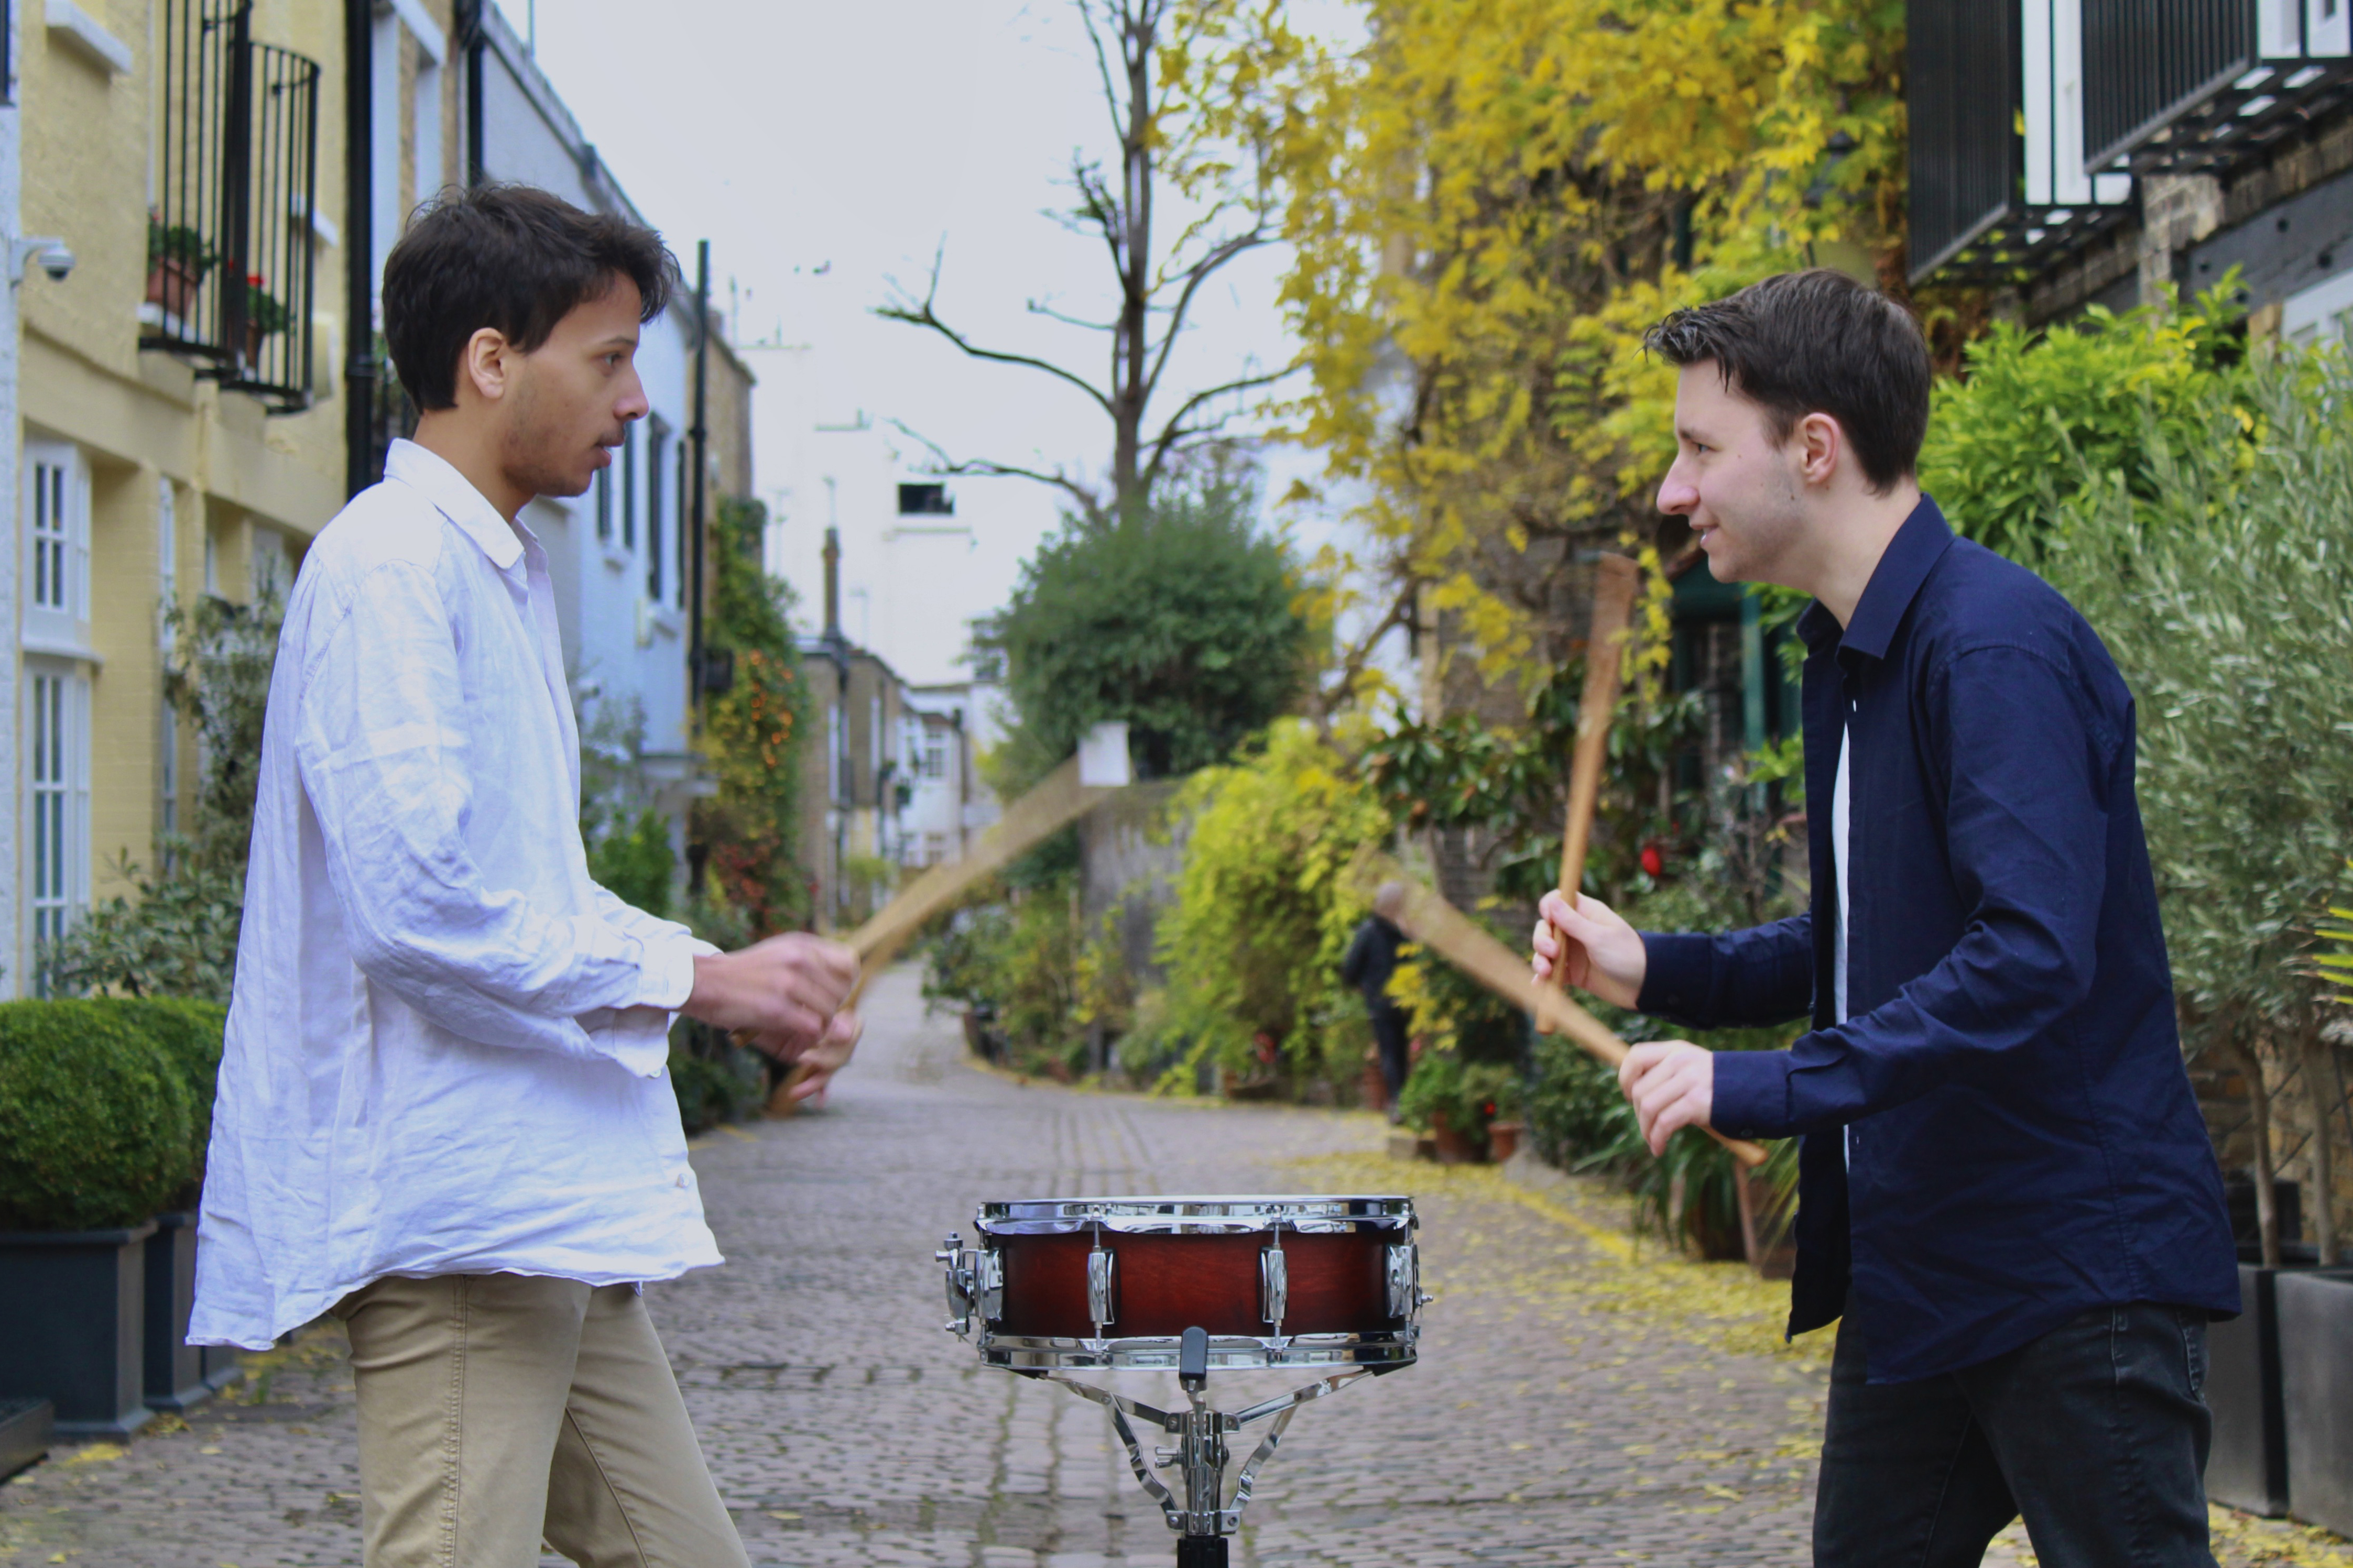 Sirocco Duo playing a drum together on a London street